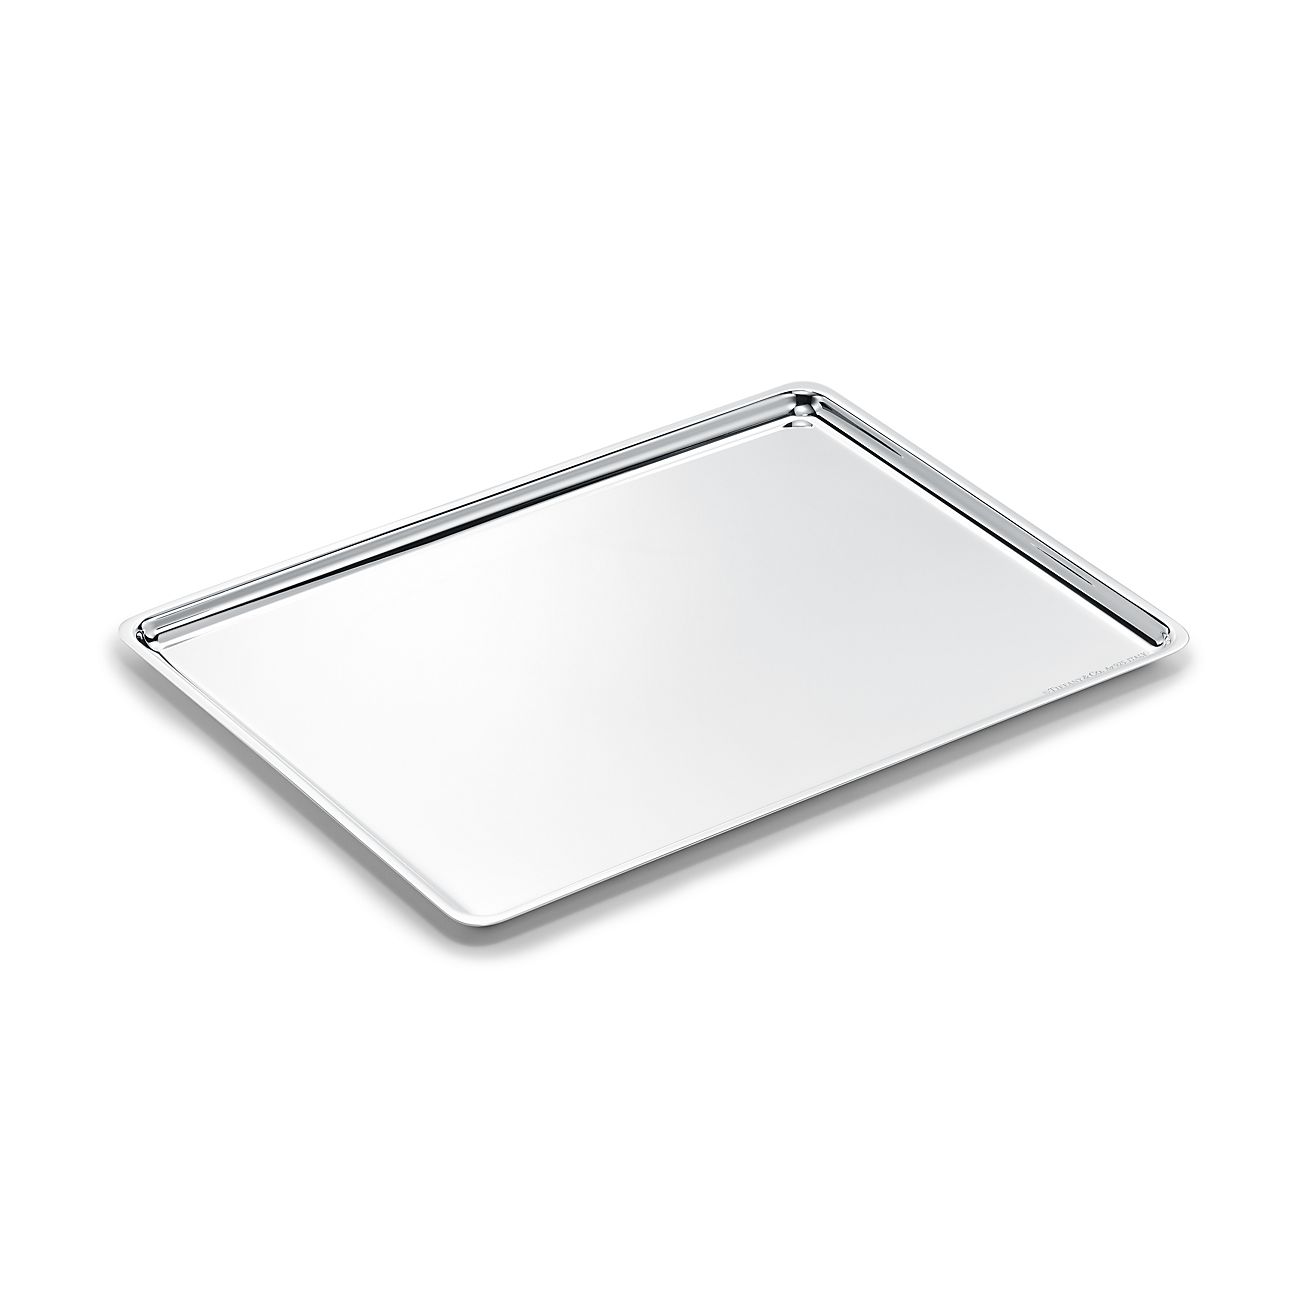 Rectangular tray in sterling silver, 9 